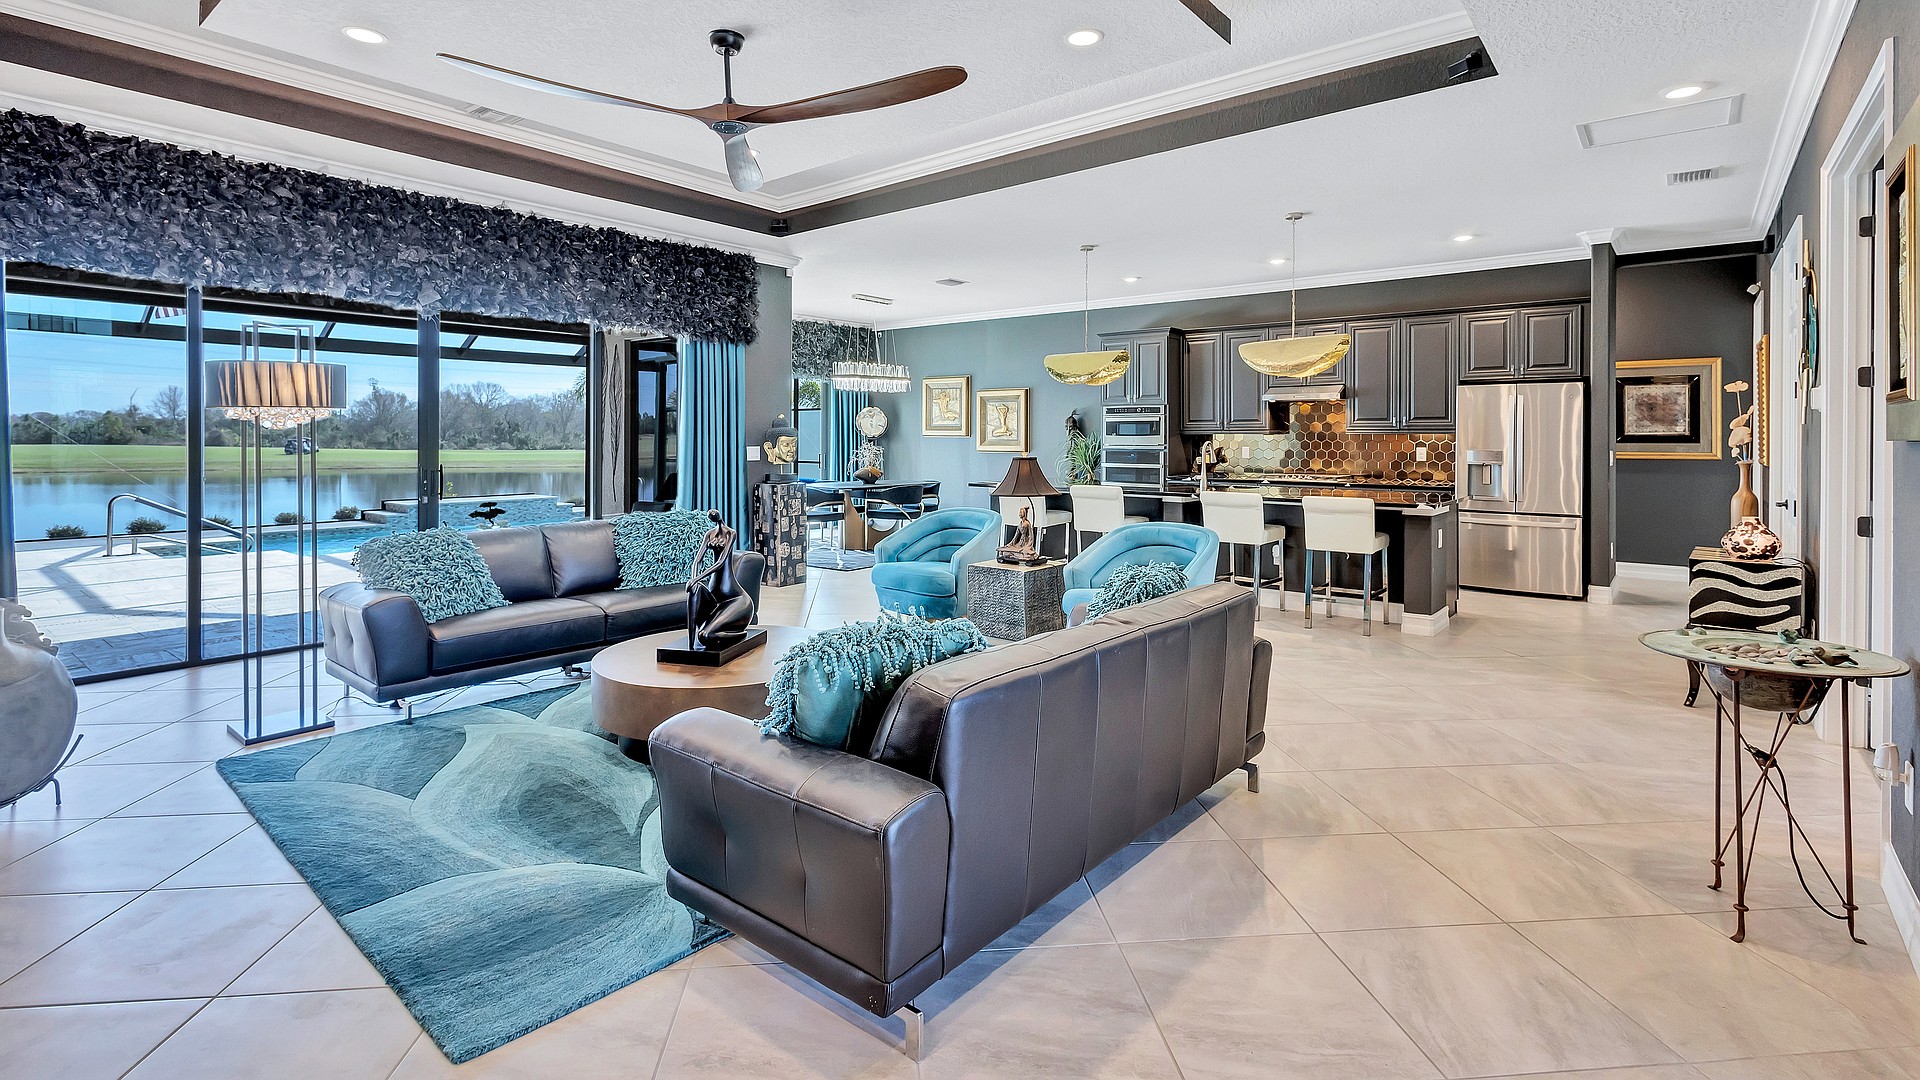 A dramatic mix of colors enlivens the open concept living area, with equally dramatic views of the lake and golf course out past the swimming pool.